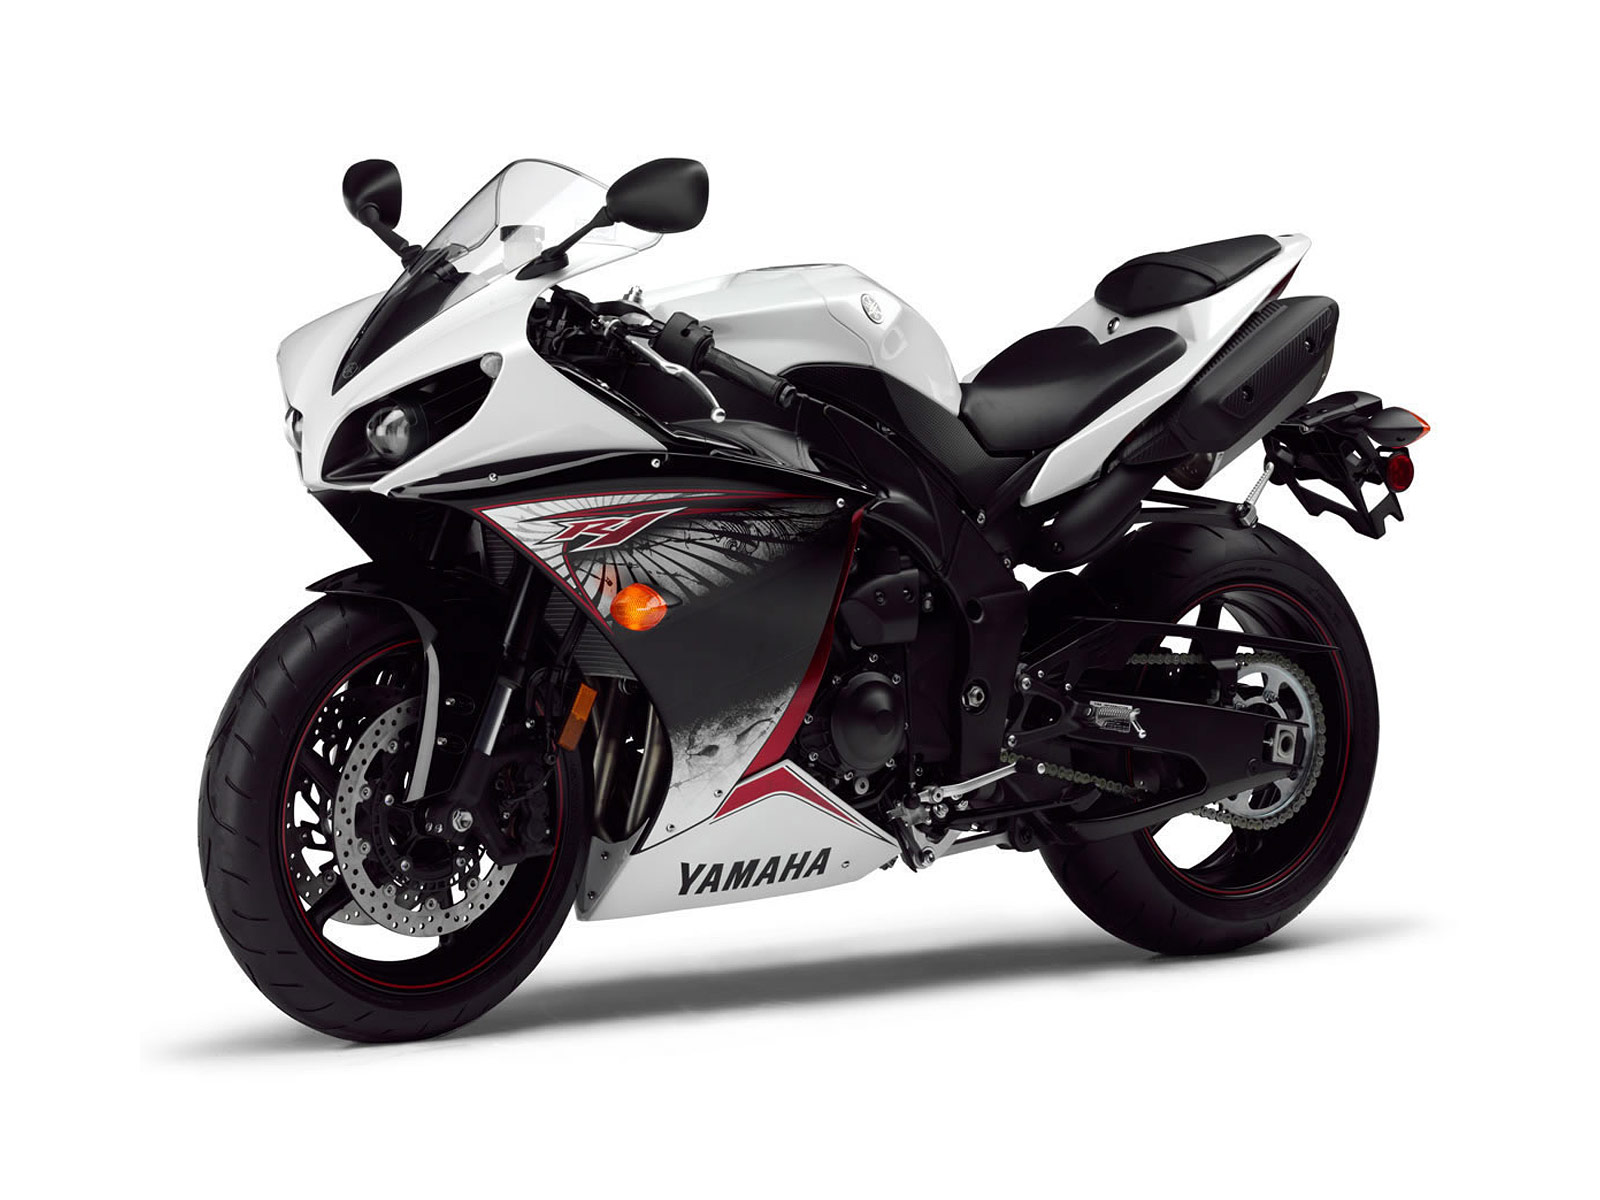 2012 YAMAHA FZ1 motorcycle pictures, review and